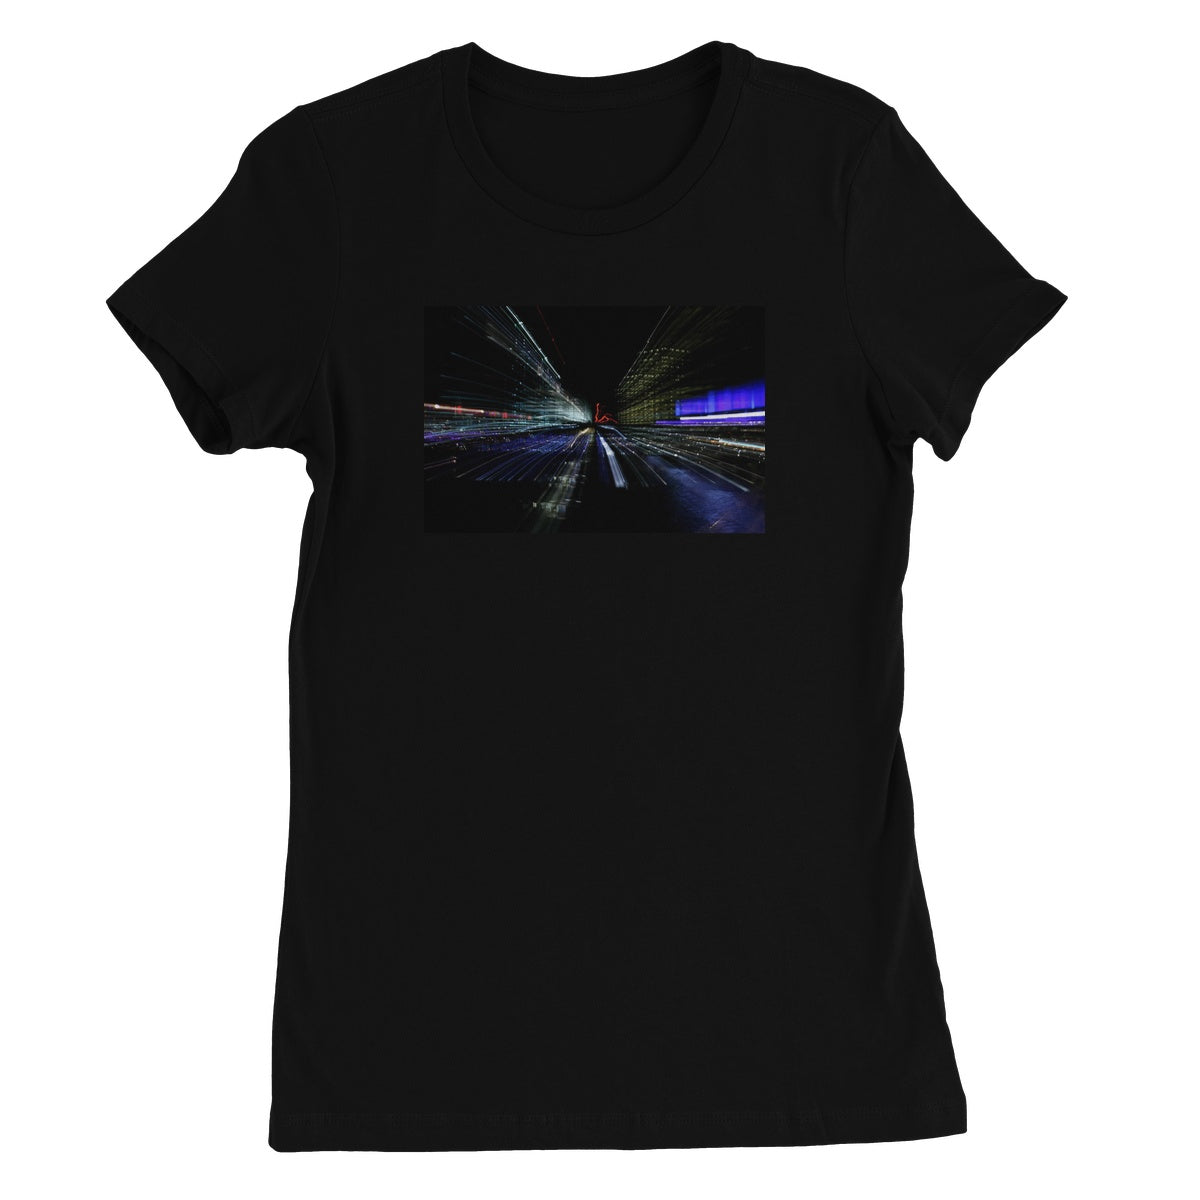 LONDON NIGHTS: CHAOS Women's Fitted T-Shirt - Amy Adams Photography